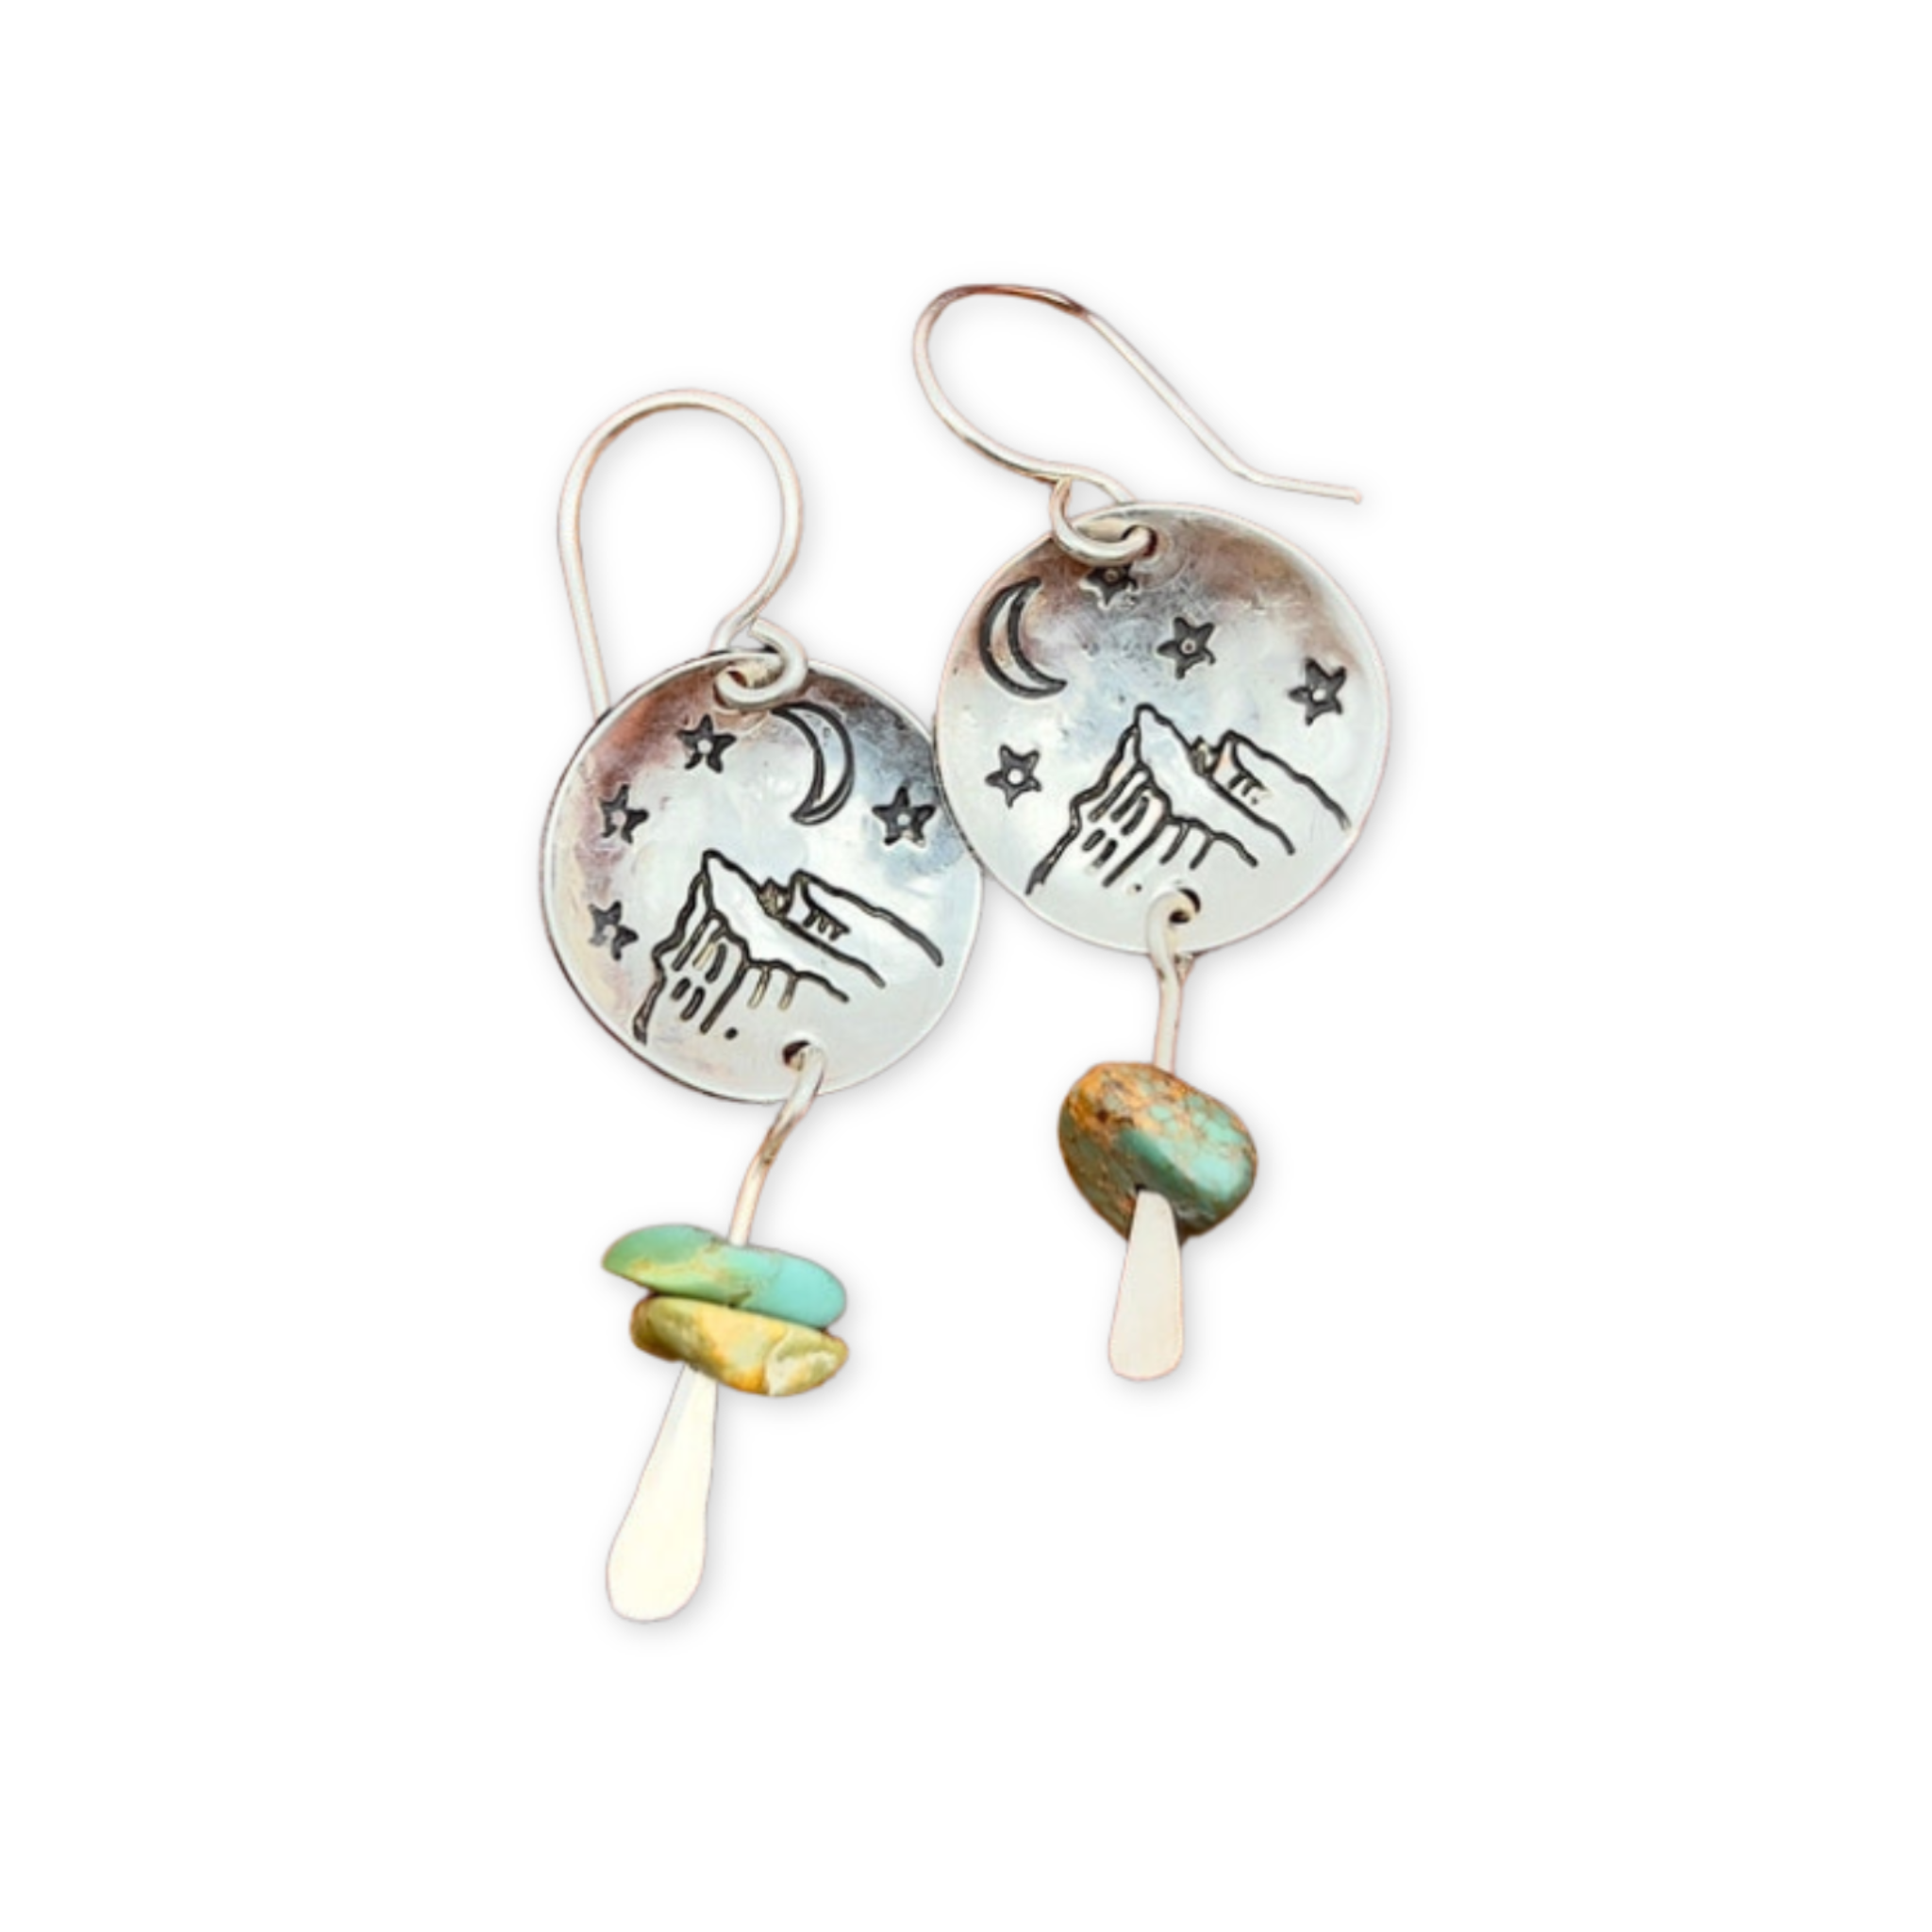 earrings featuring round disc pendants stamped with a mountain and night sky and hanging turquoise stones